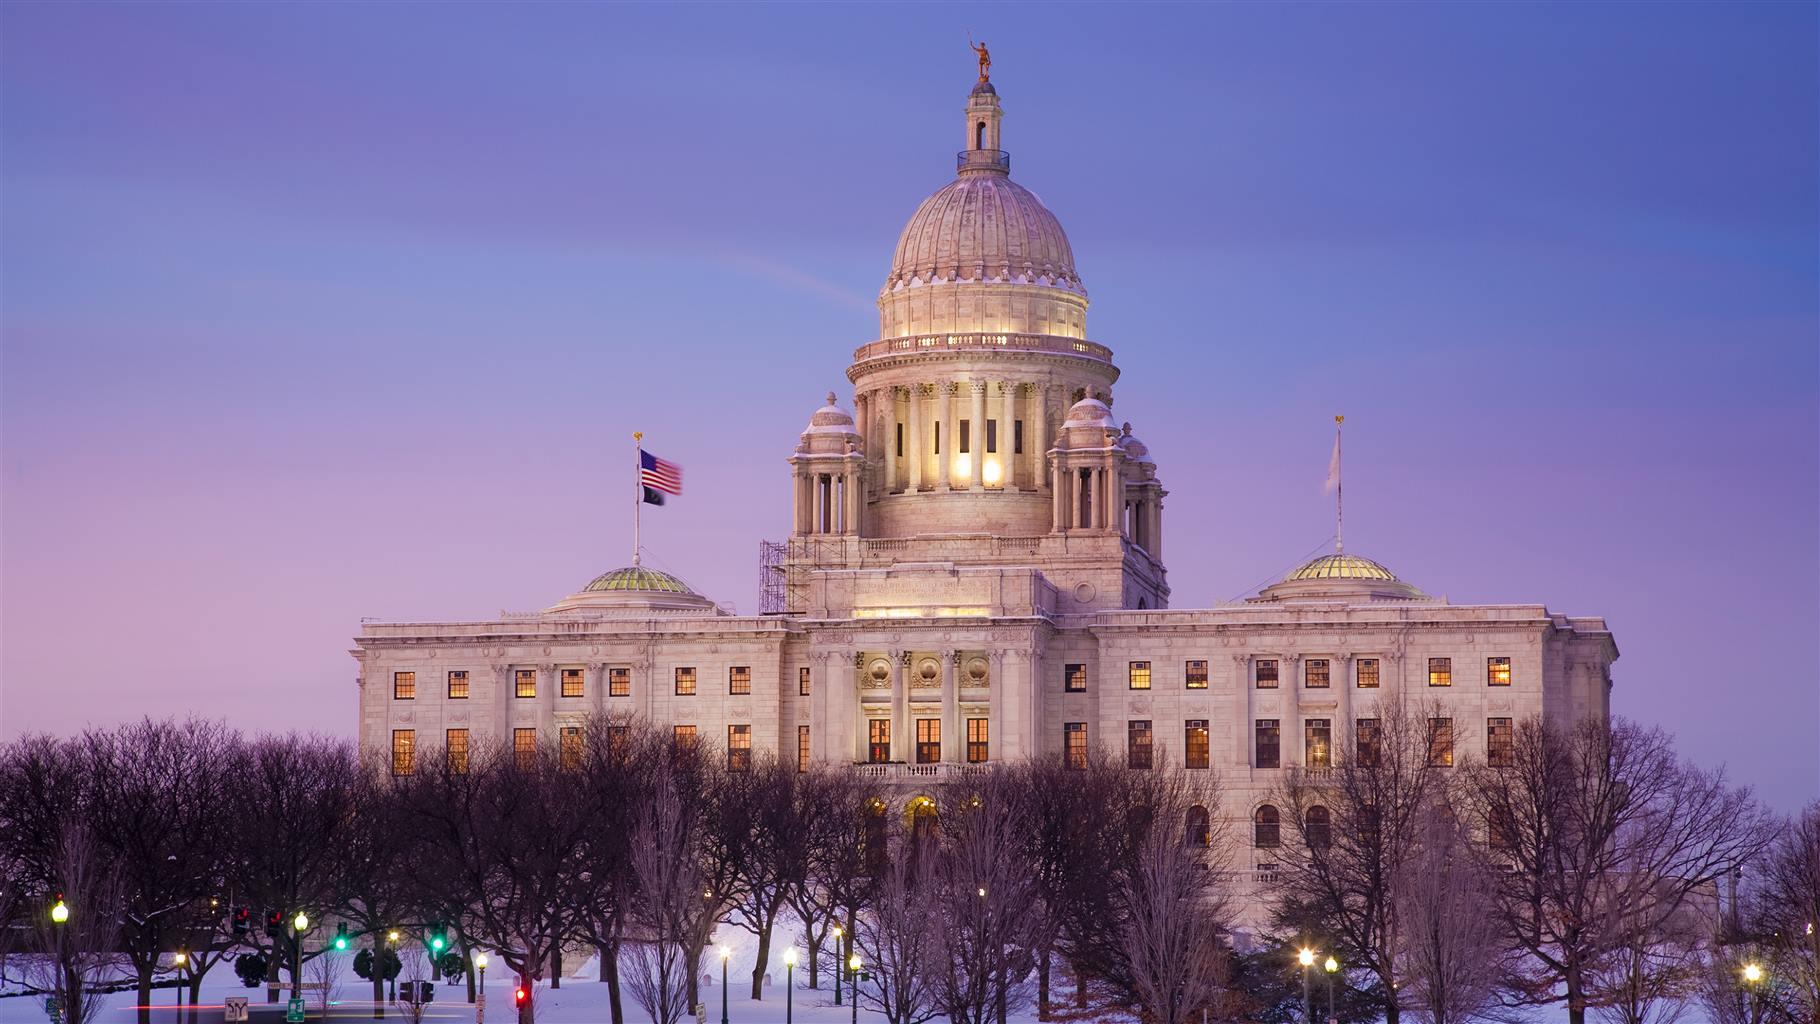 Rhode Island State House (state capitol building), winter sunset. Providence, RI (USA).